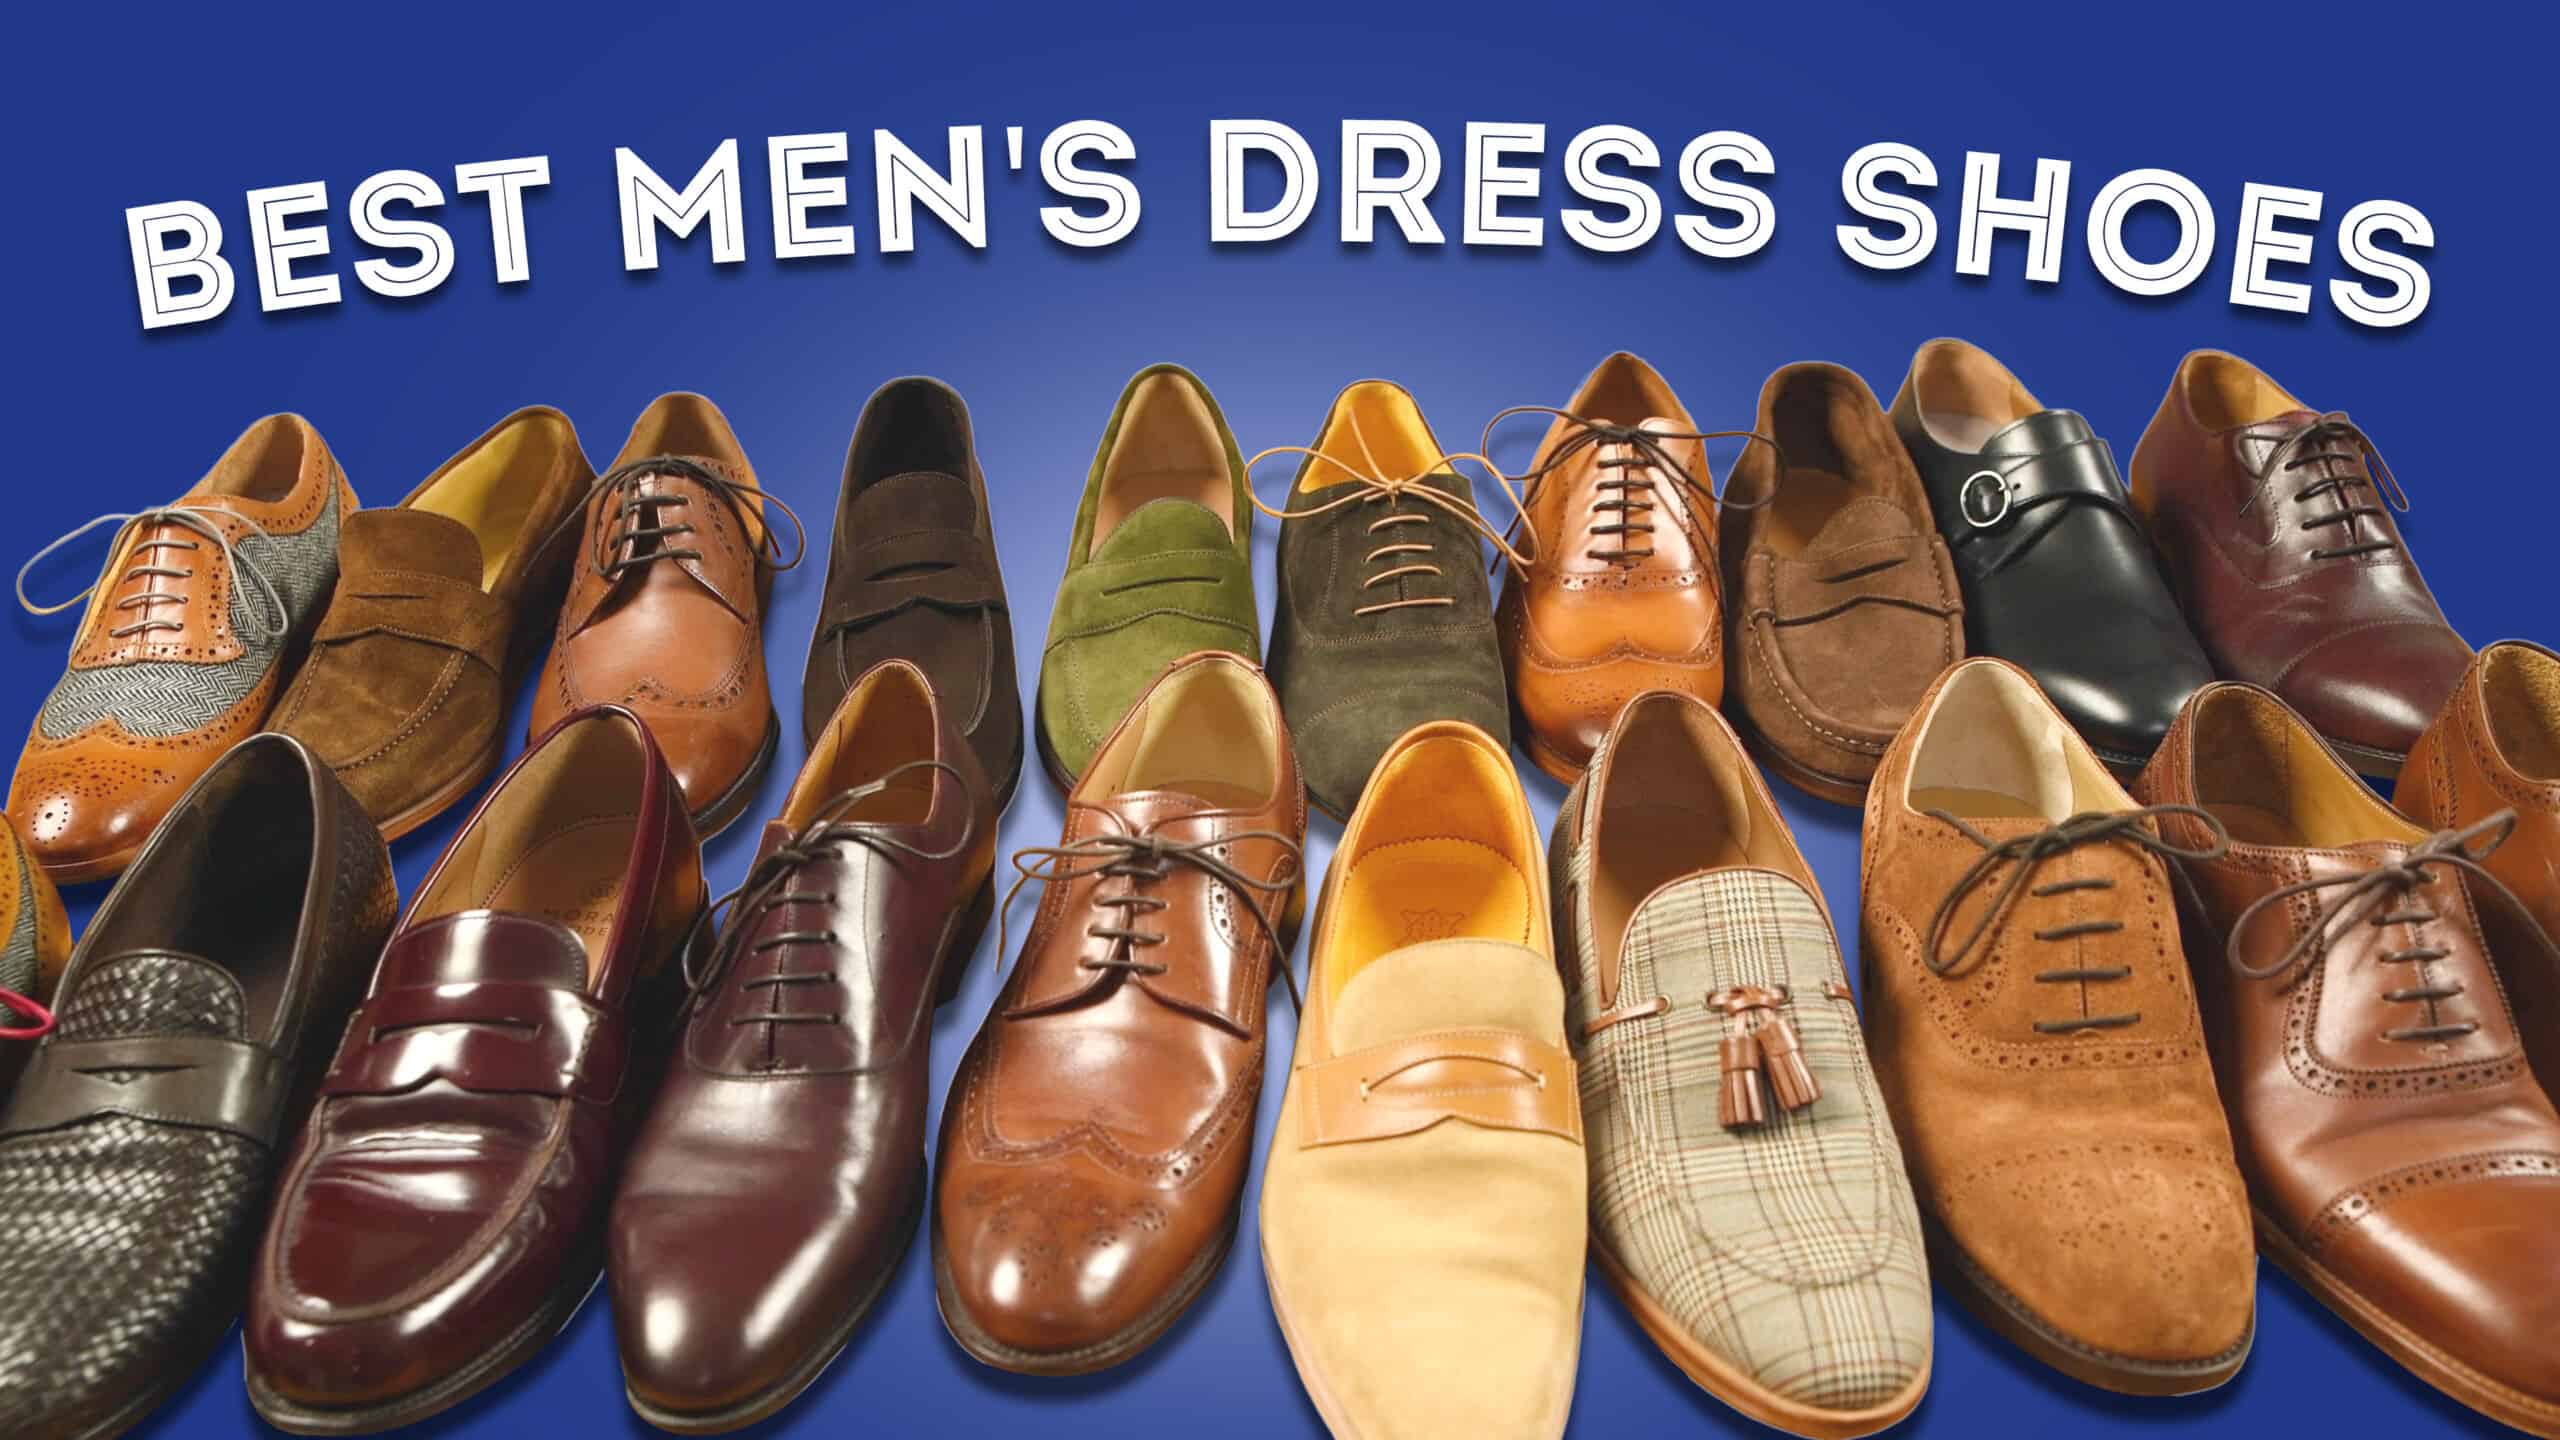 HOW TO TELL IF DRESS SHOES ARE GOOD QUALITY BEFORE BUYING THEM